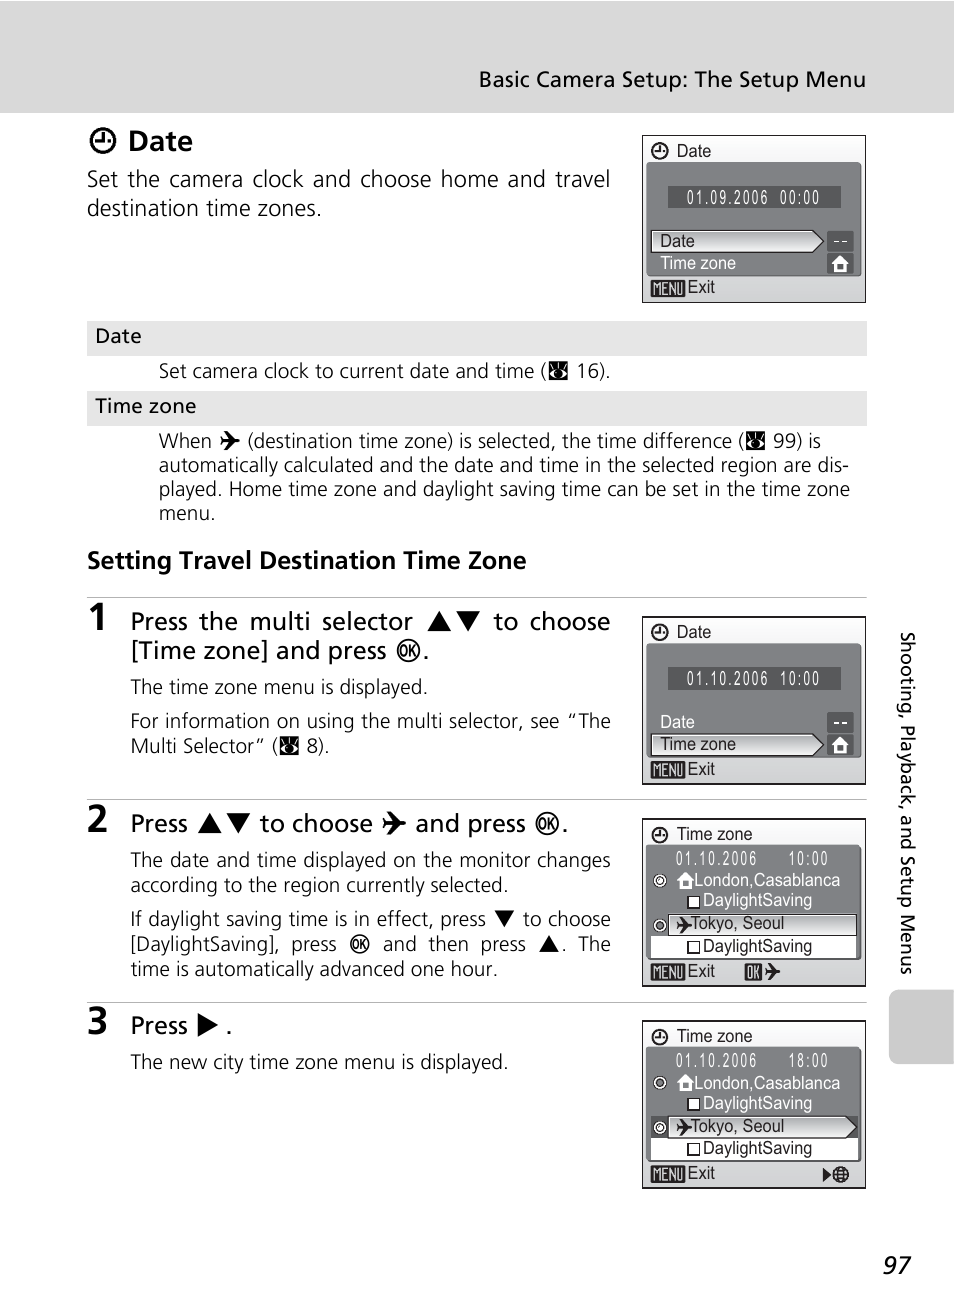 Wdate, Setting travel destination time zone, Press gh to choose y and press d | Press j | Nikon COOLPIX S9 User Manual | Page 109 / 142